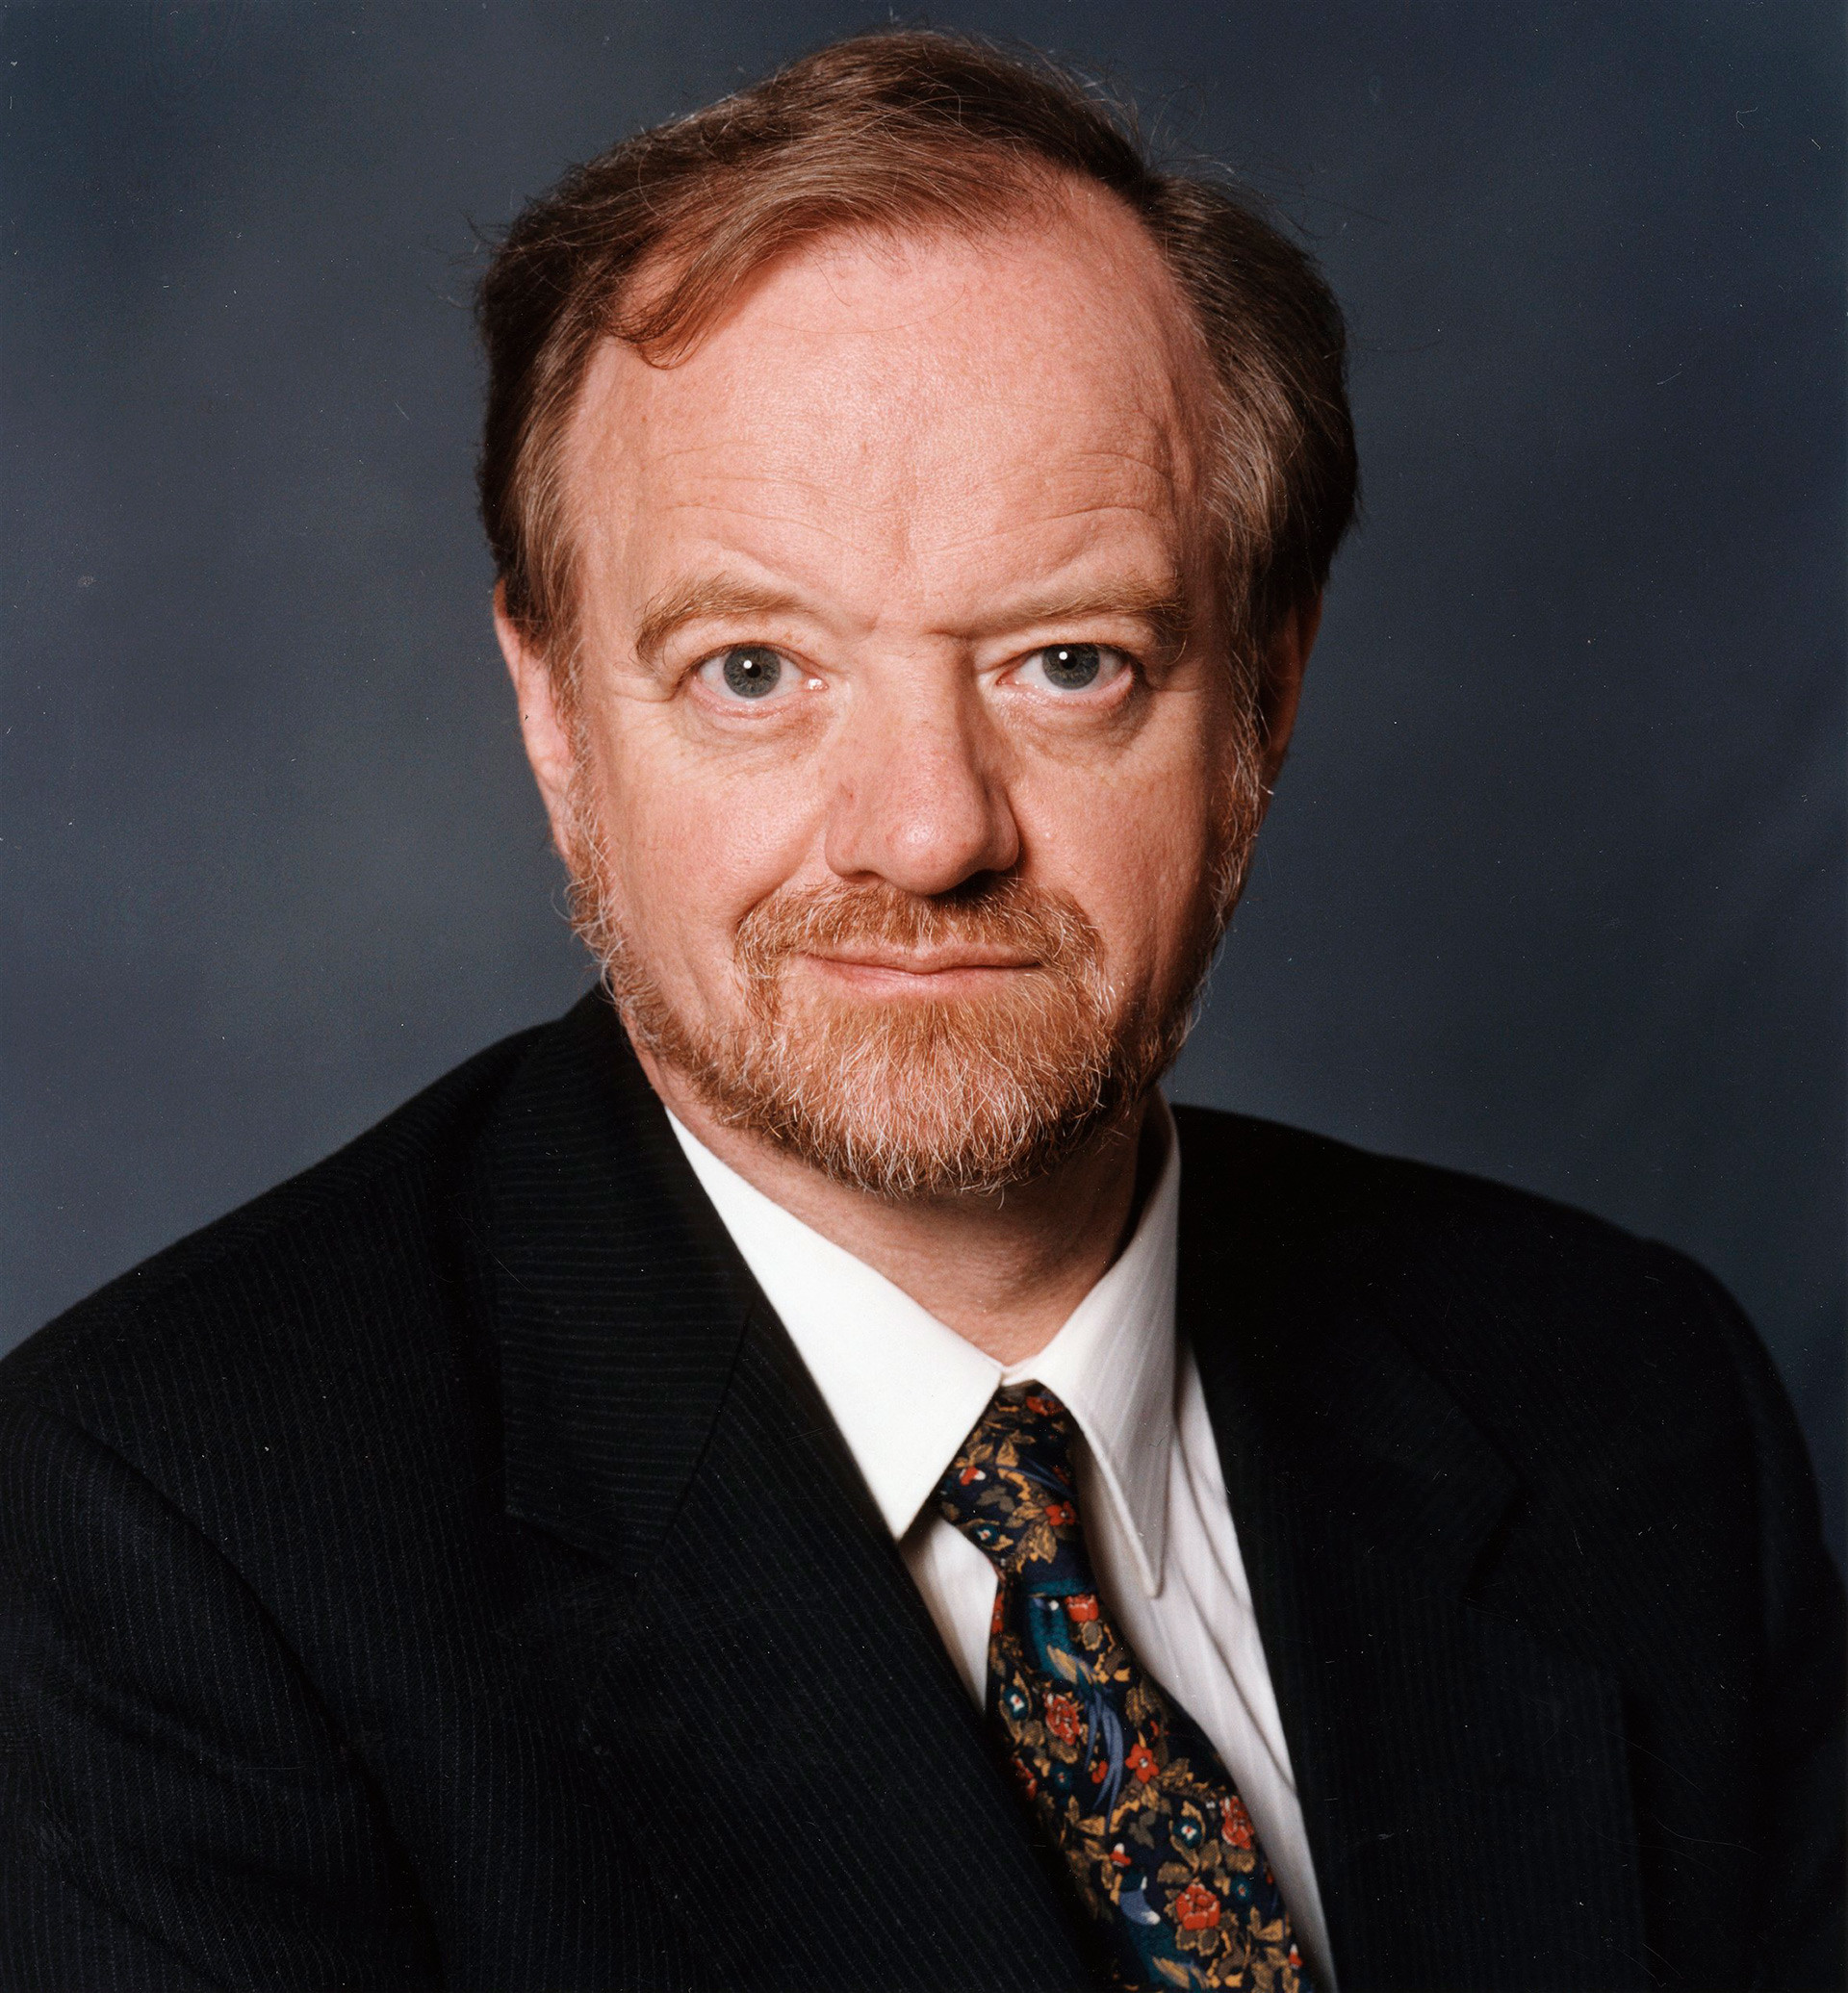 Robin Cook (1946 - 2005), British Labour Party politician, Foreign Secretary (1997 - 2001)